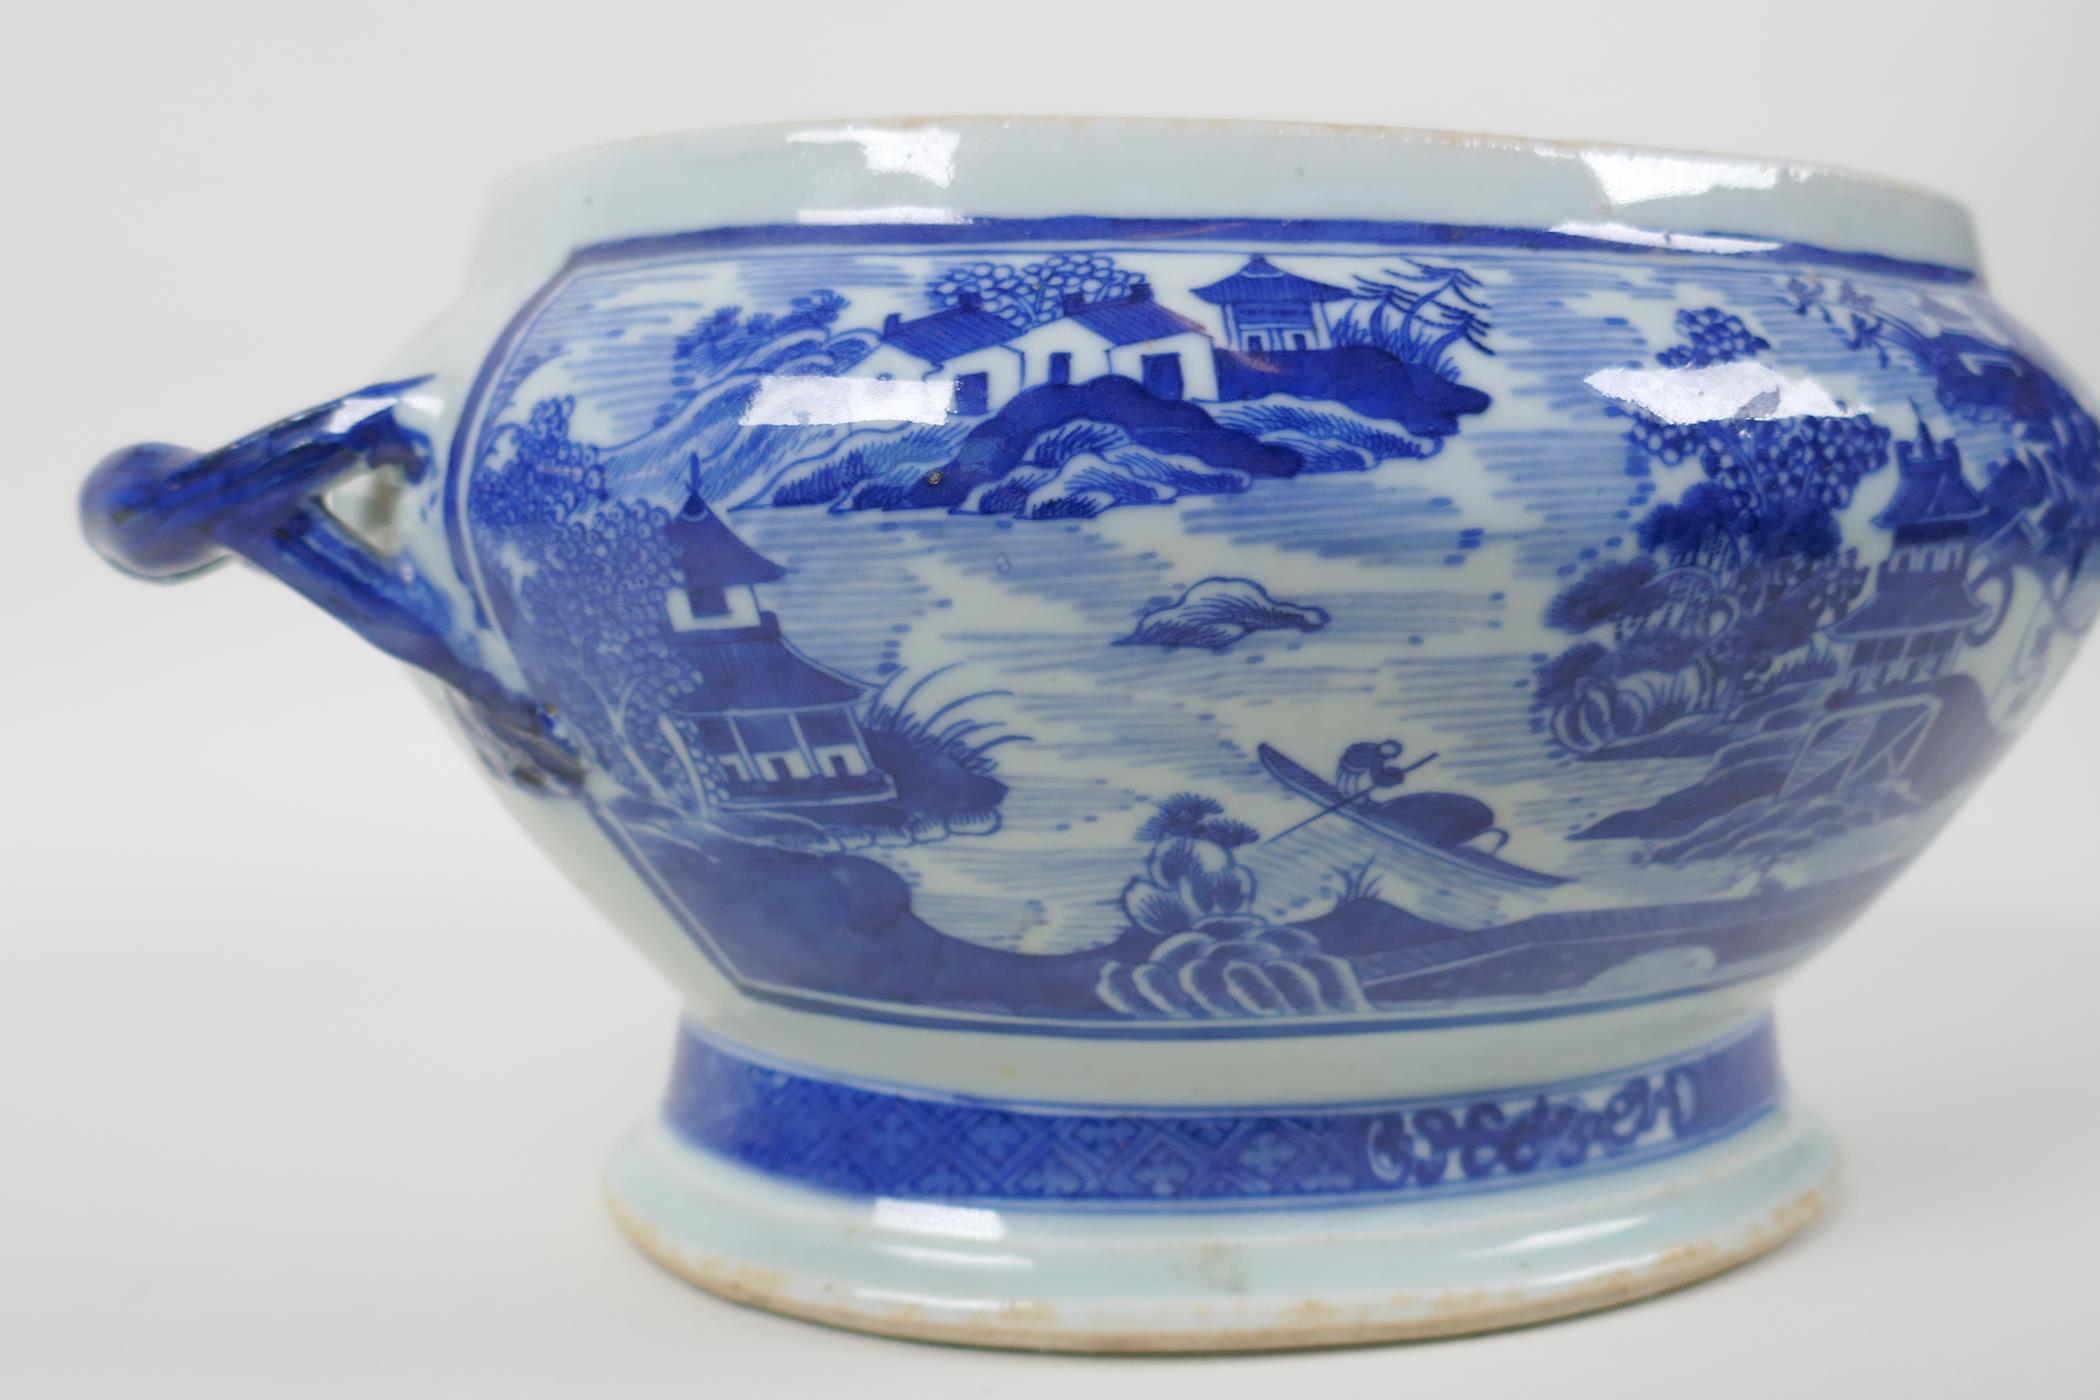 A C19th Chinese export blue and white porcelain two handled oval planter with decorative riverside - Image 2 of 5